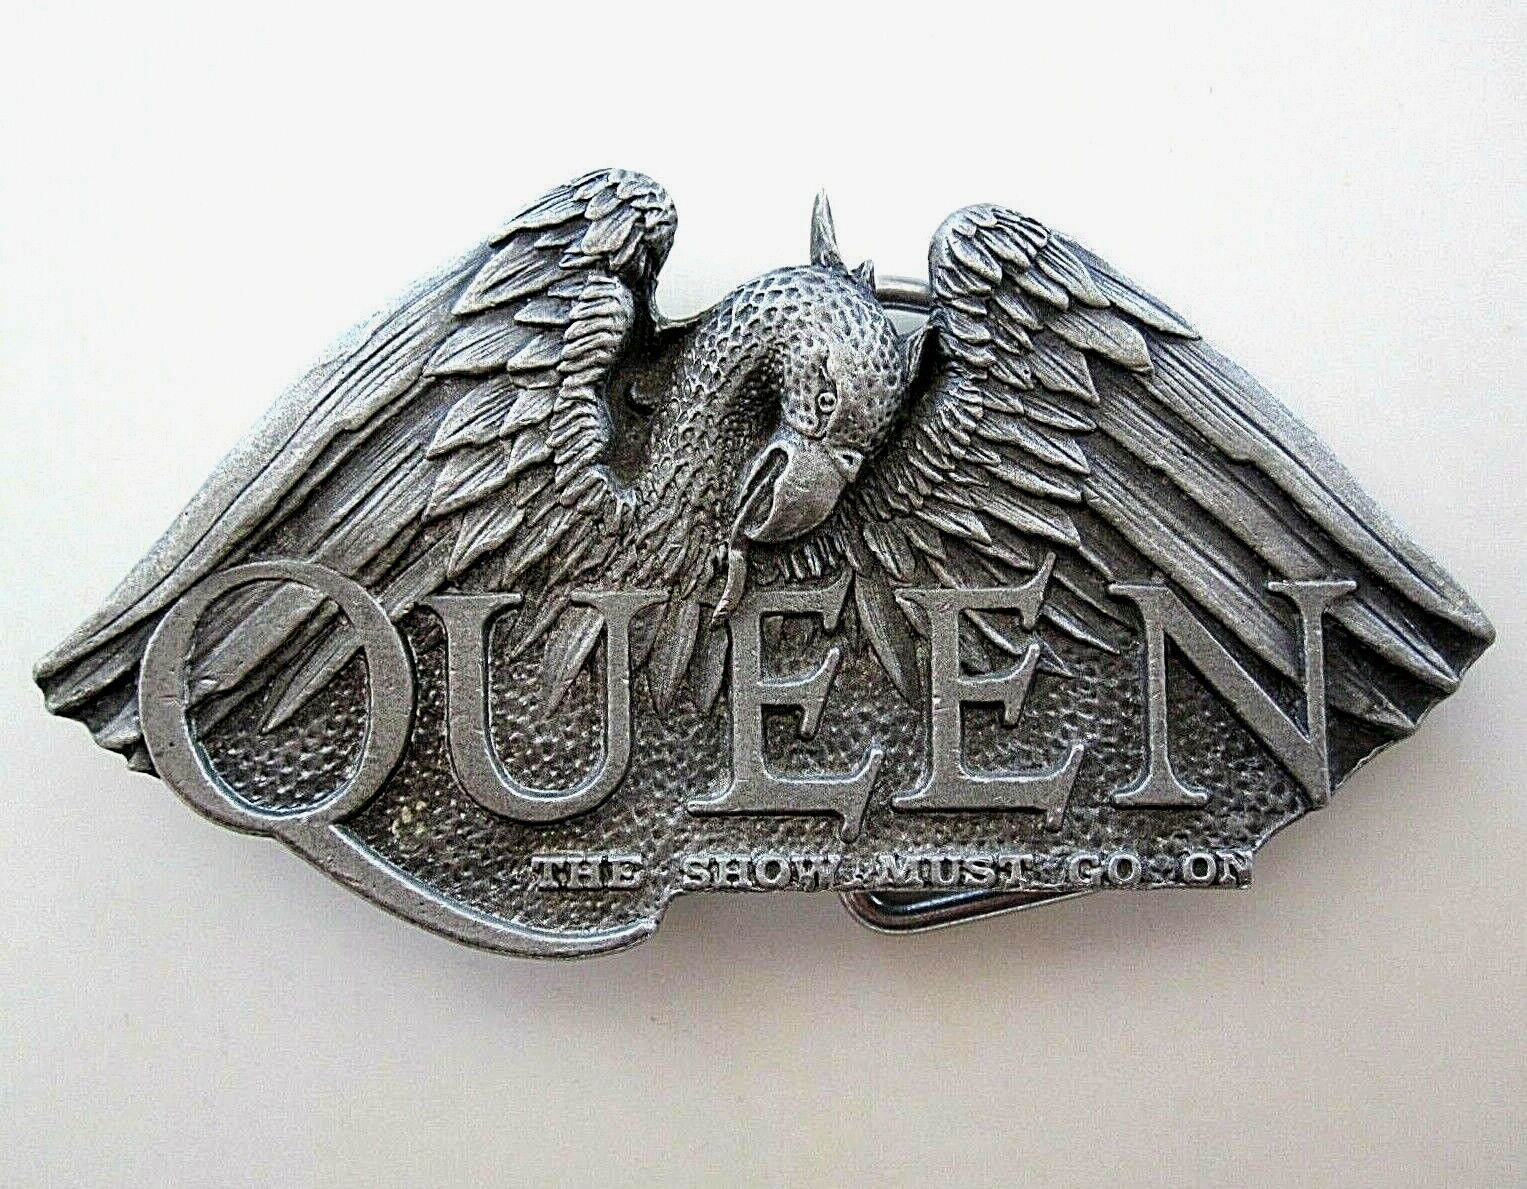 Queen - The Show Must Go On - Official 1992 Vintage Pewter Metal Belt Buckle 